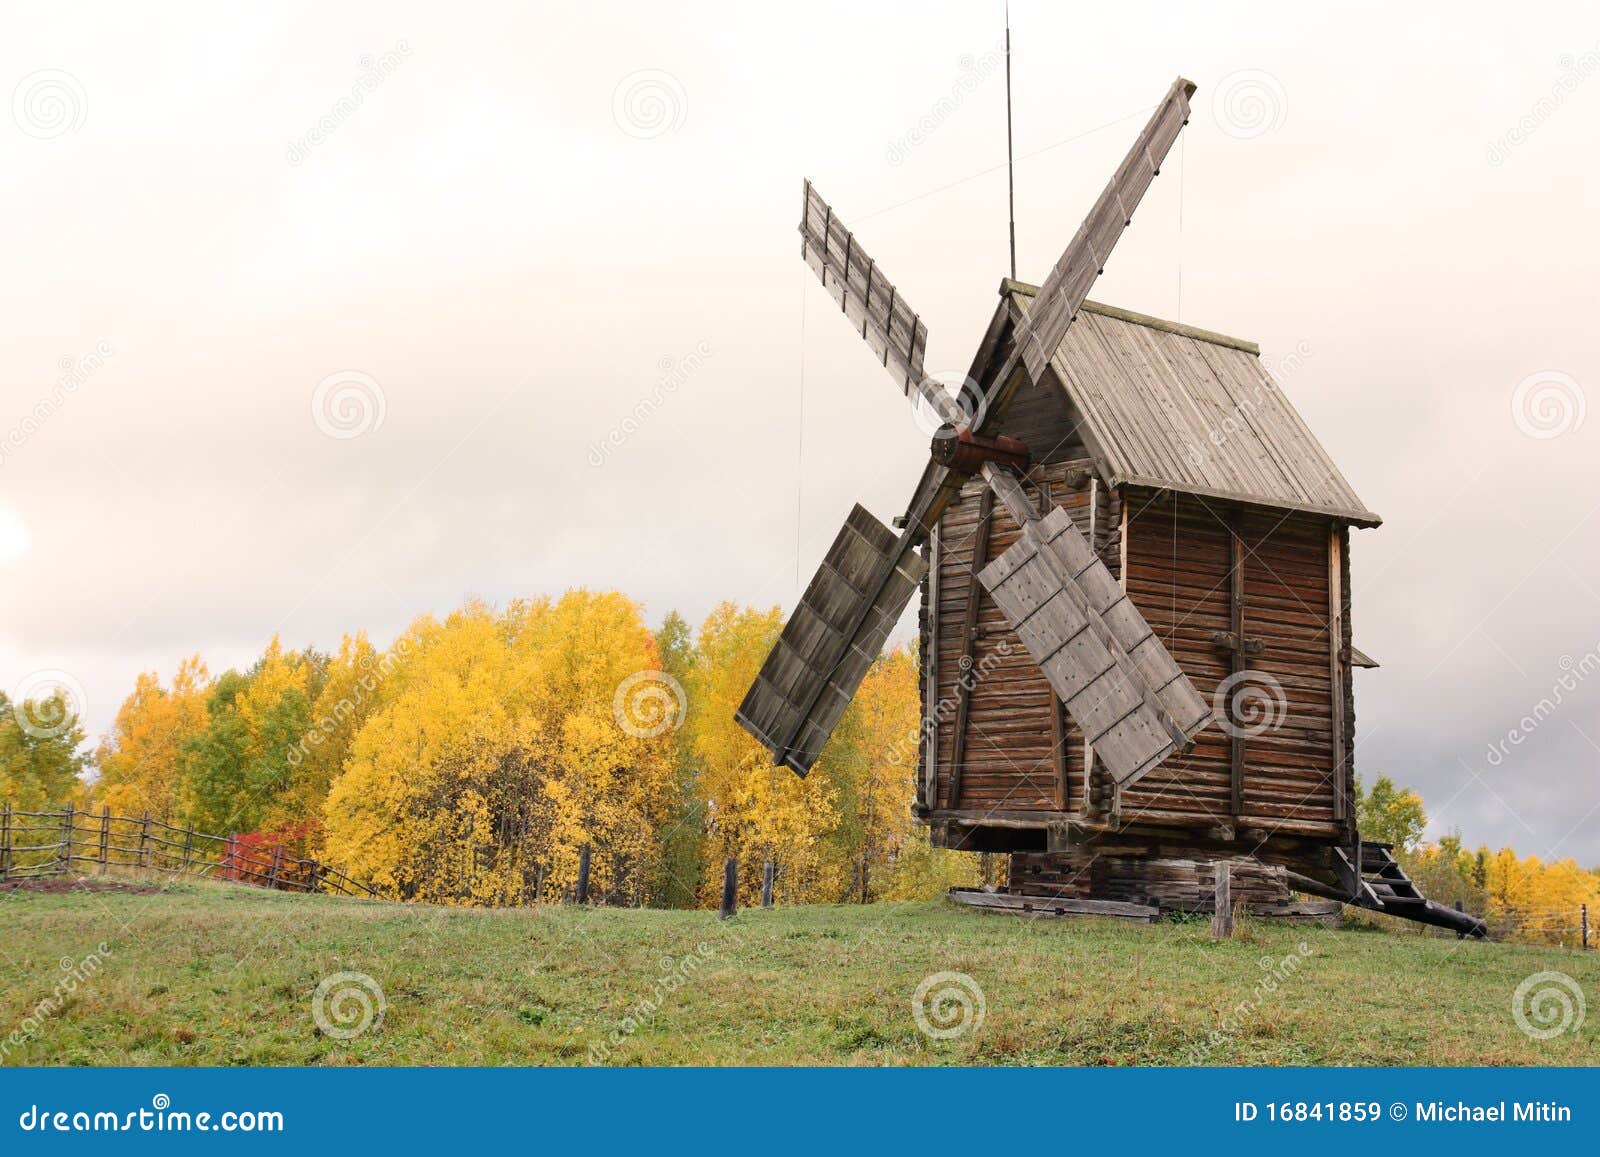 Old Windmill Royalty Free Stock Images - Image: 16841859